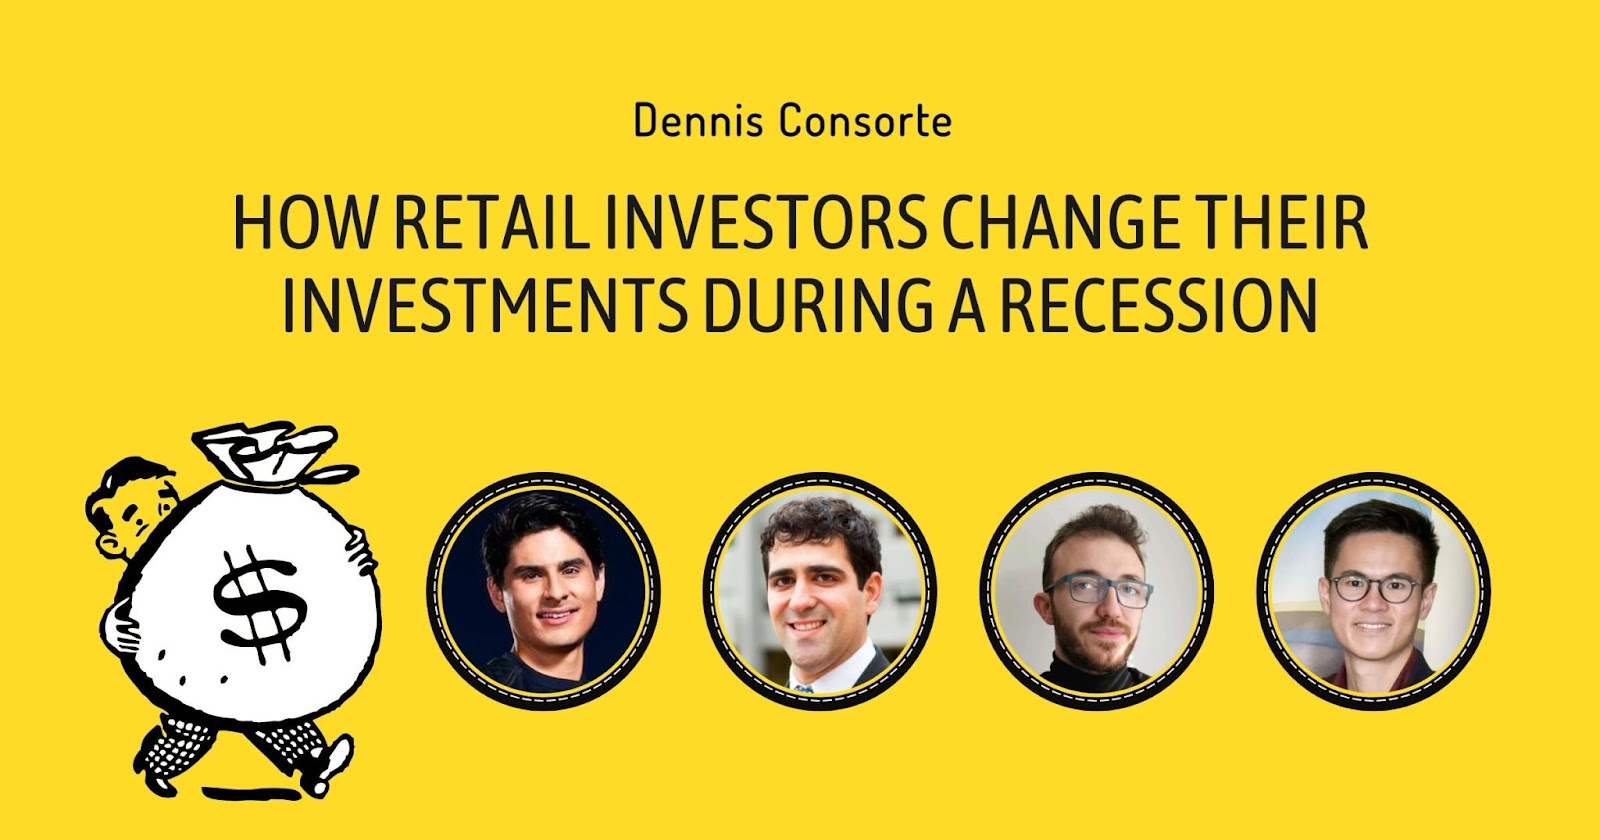 How Retail Investors Change Their Investments During a Recession